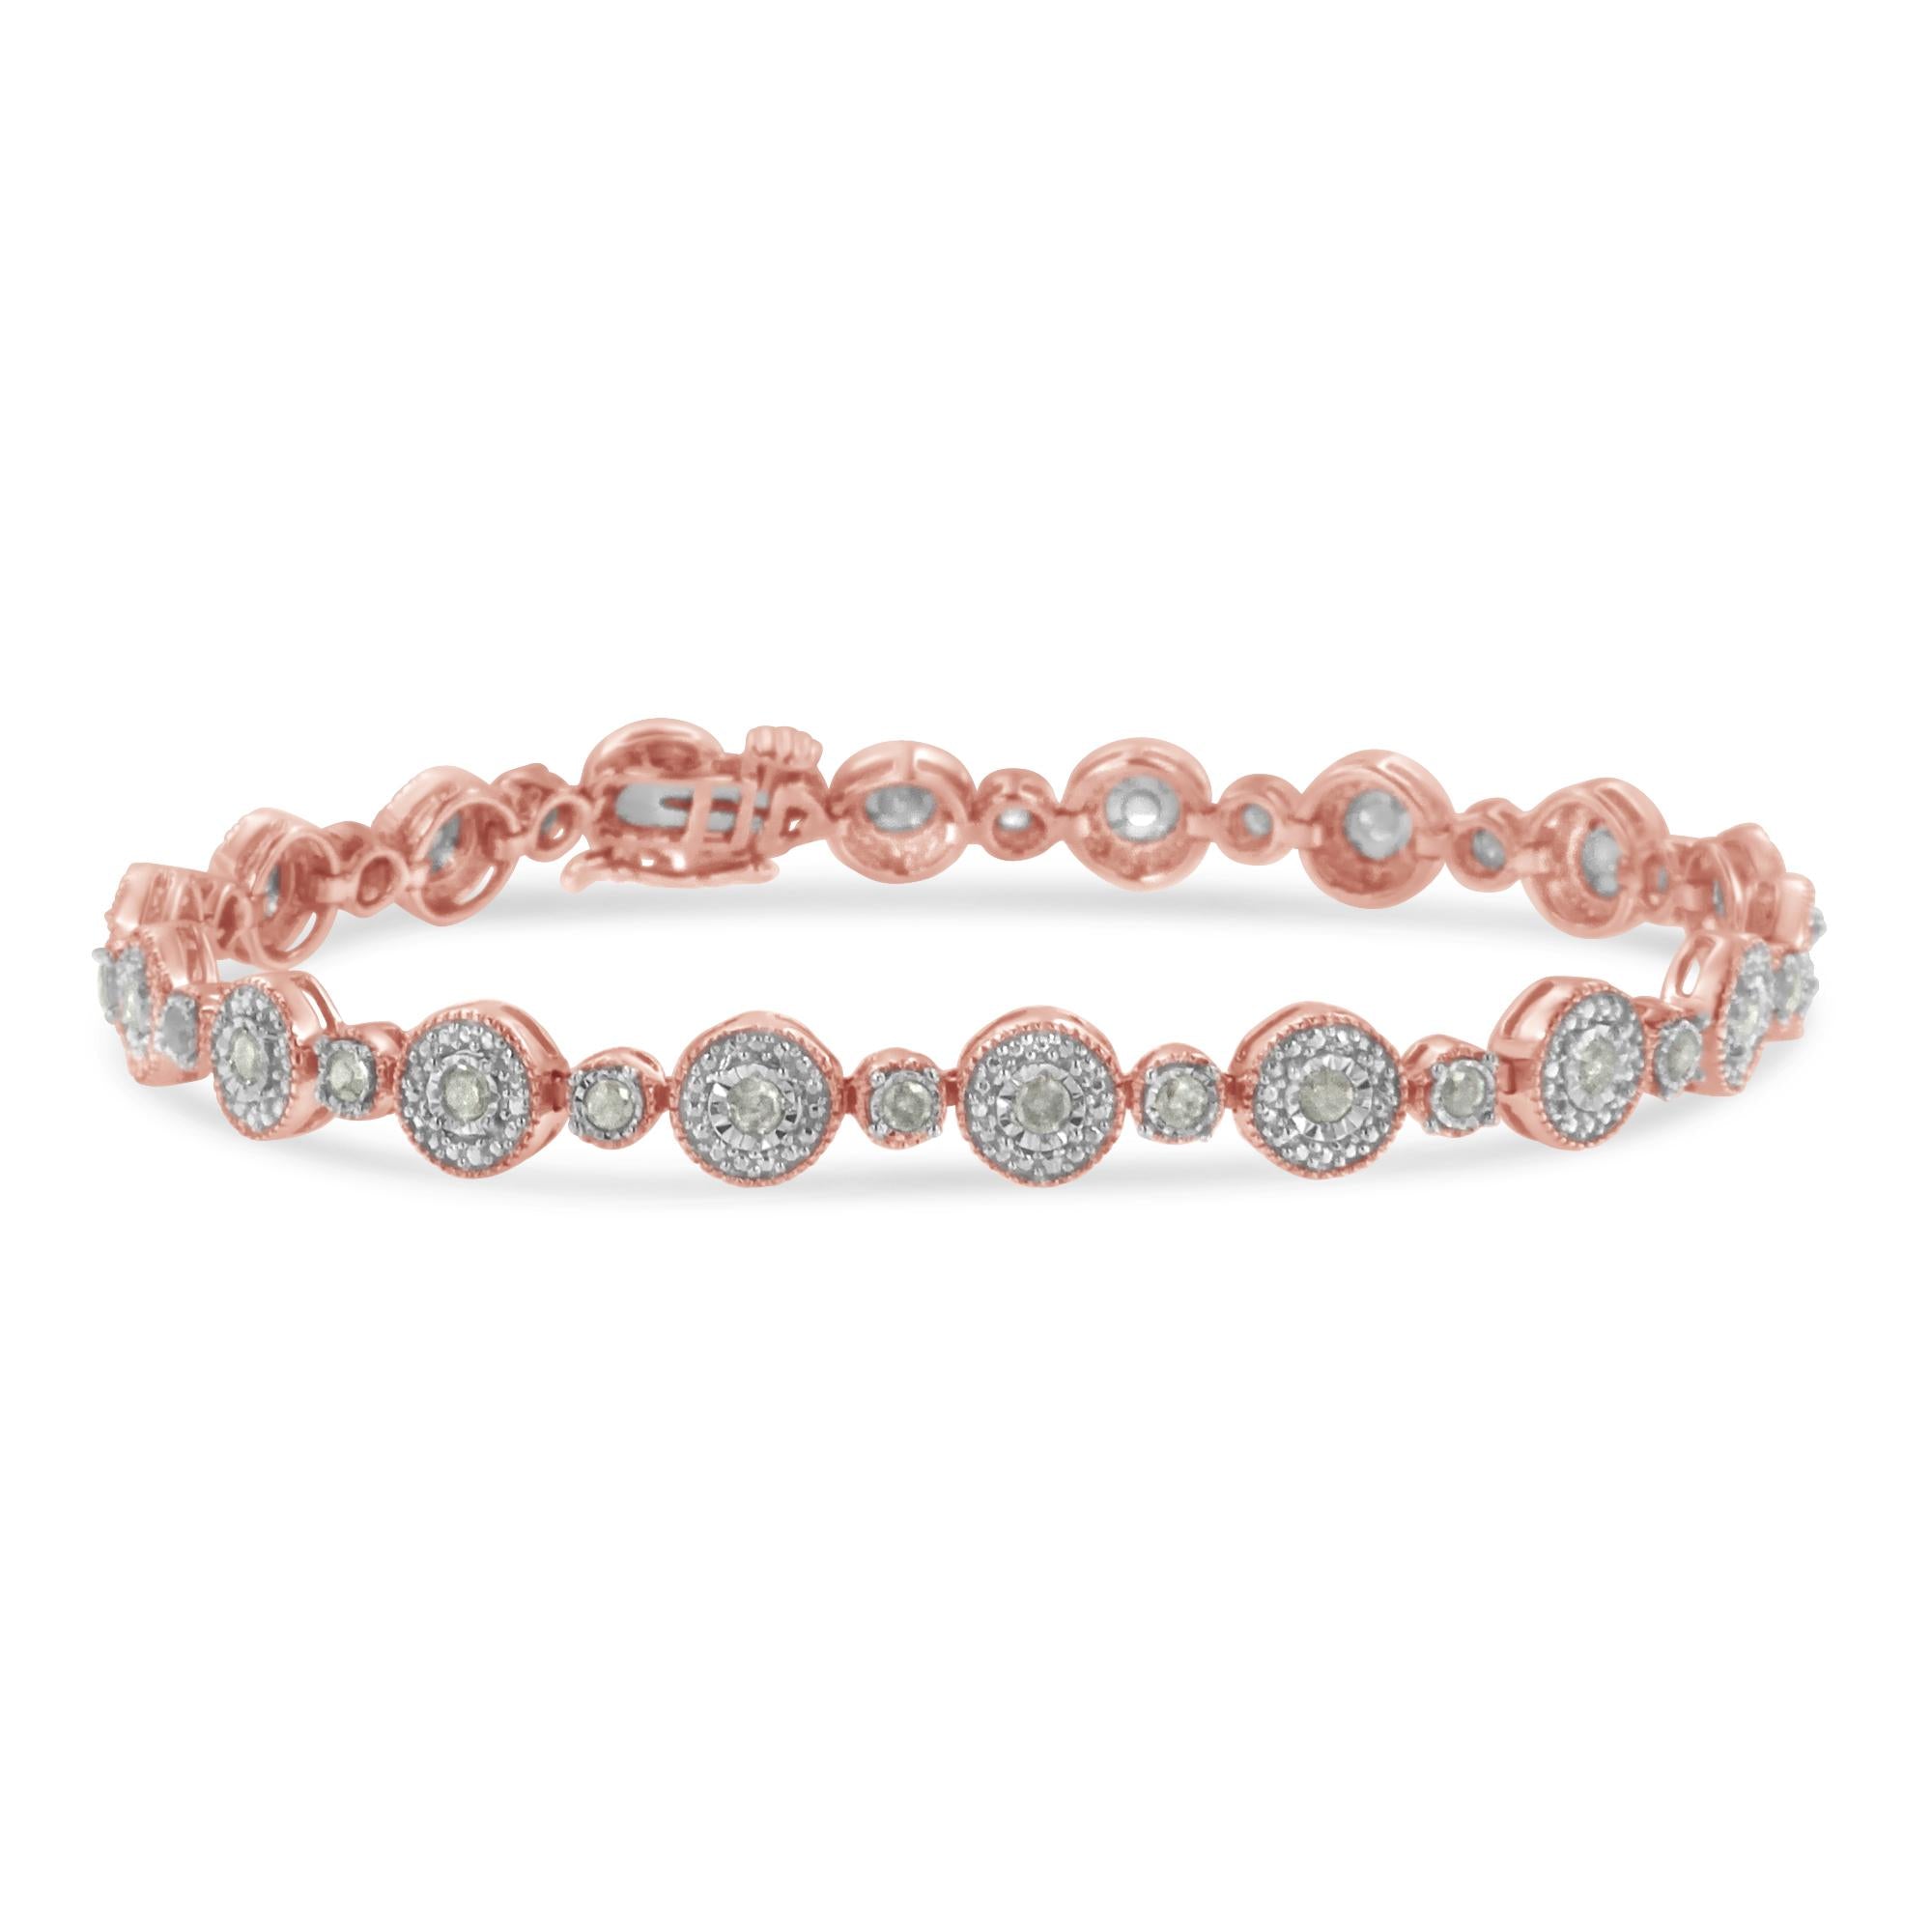 ''10k Rose Gold Plated .925 Sterling Silver 1 1/3 cttw Miracle Plate Set Diamond Alternating Link BRA